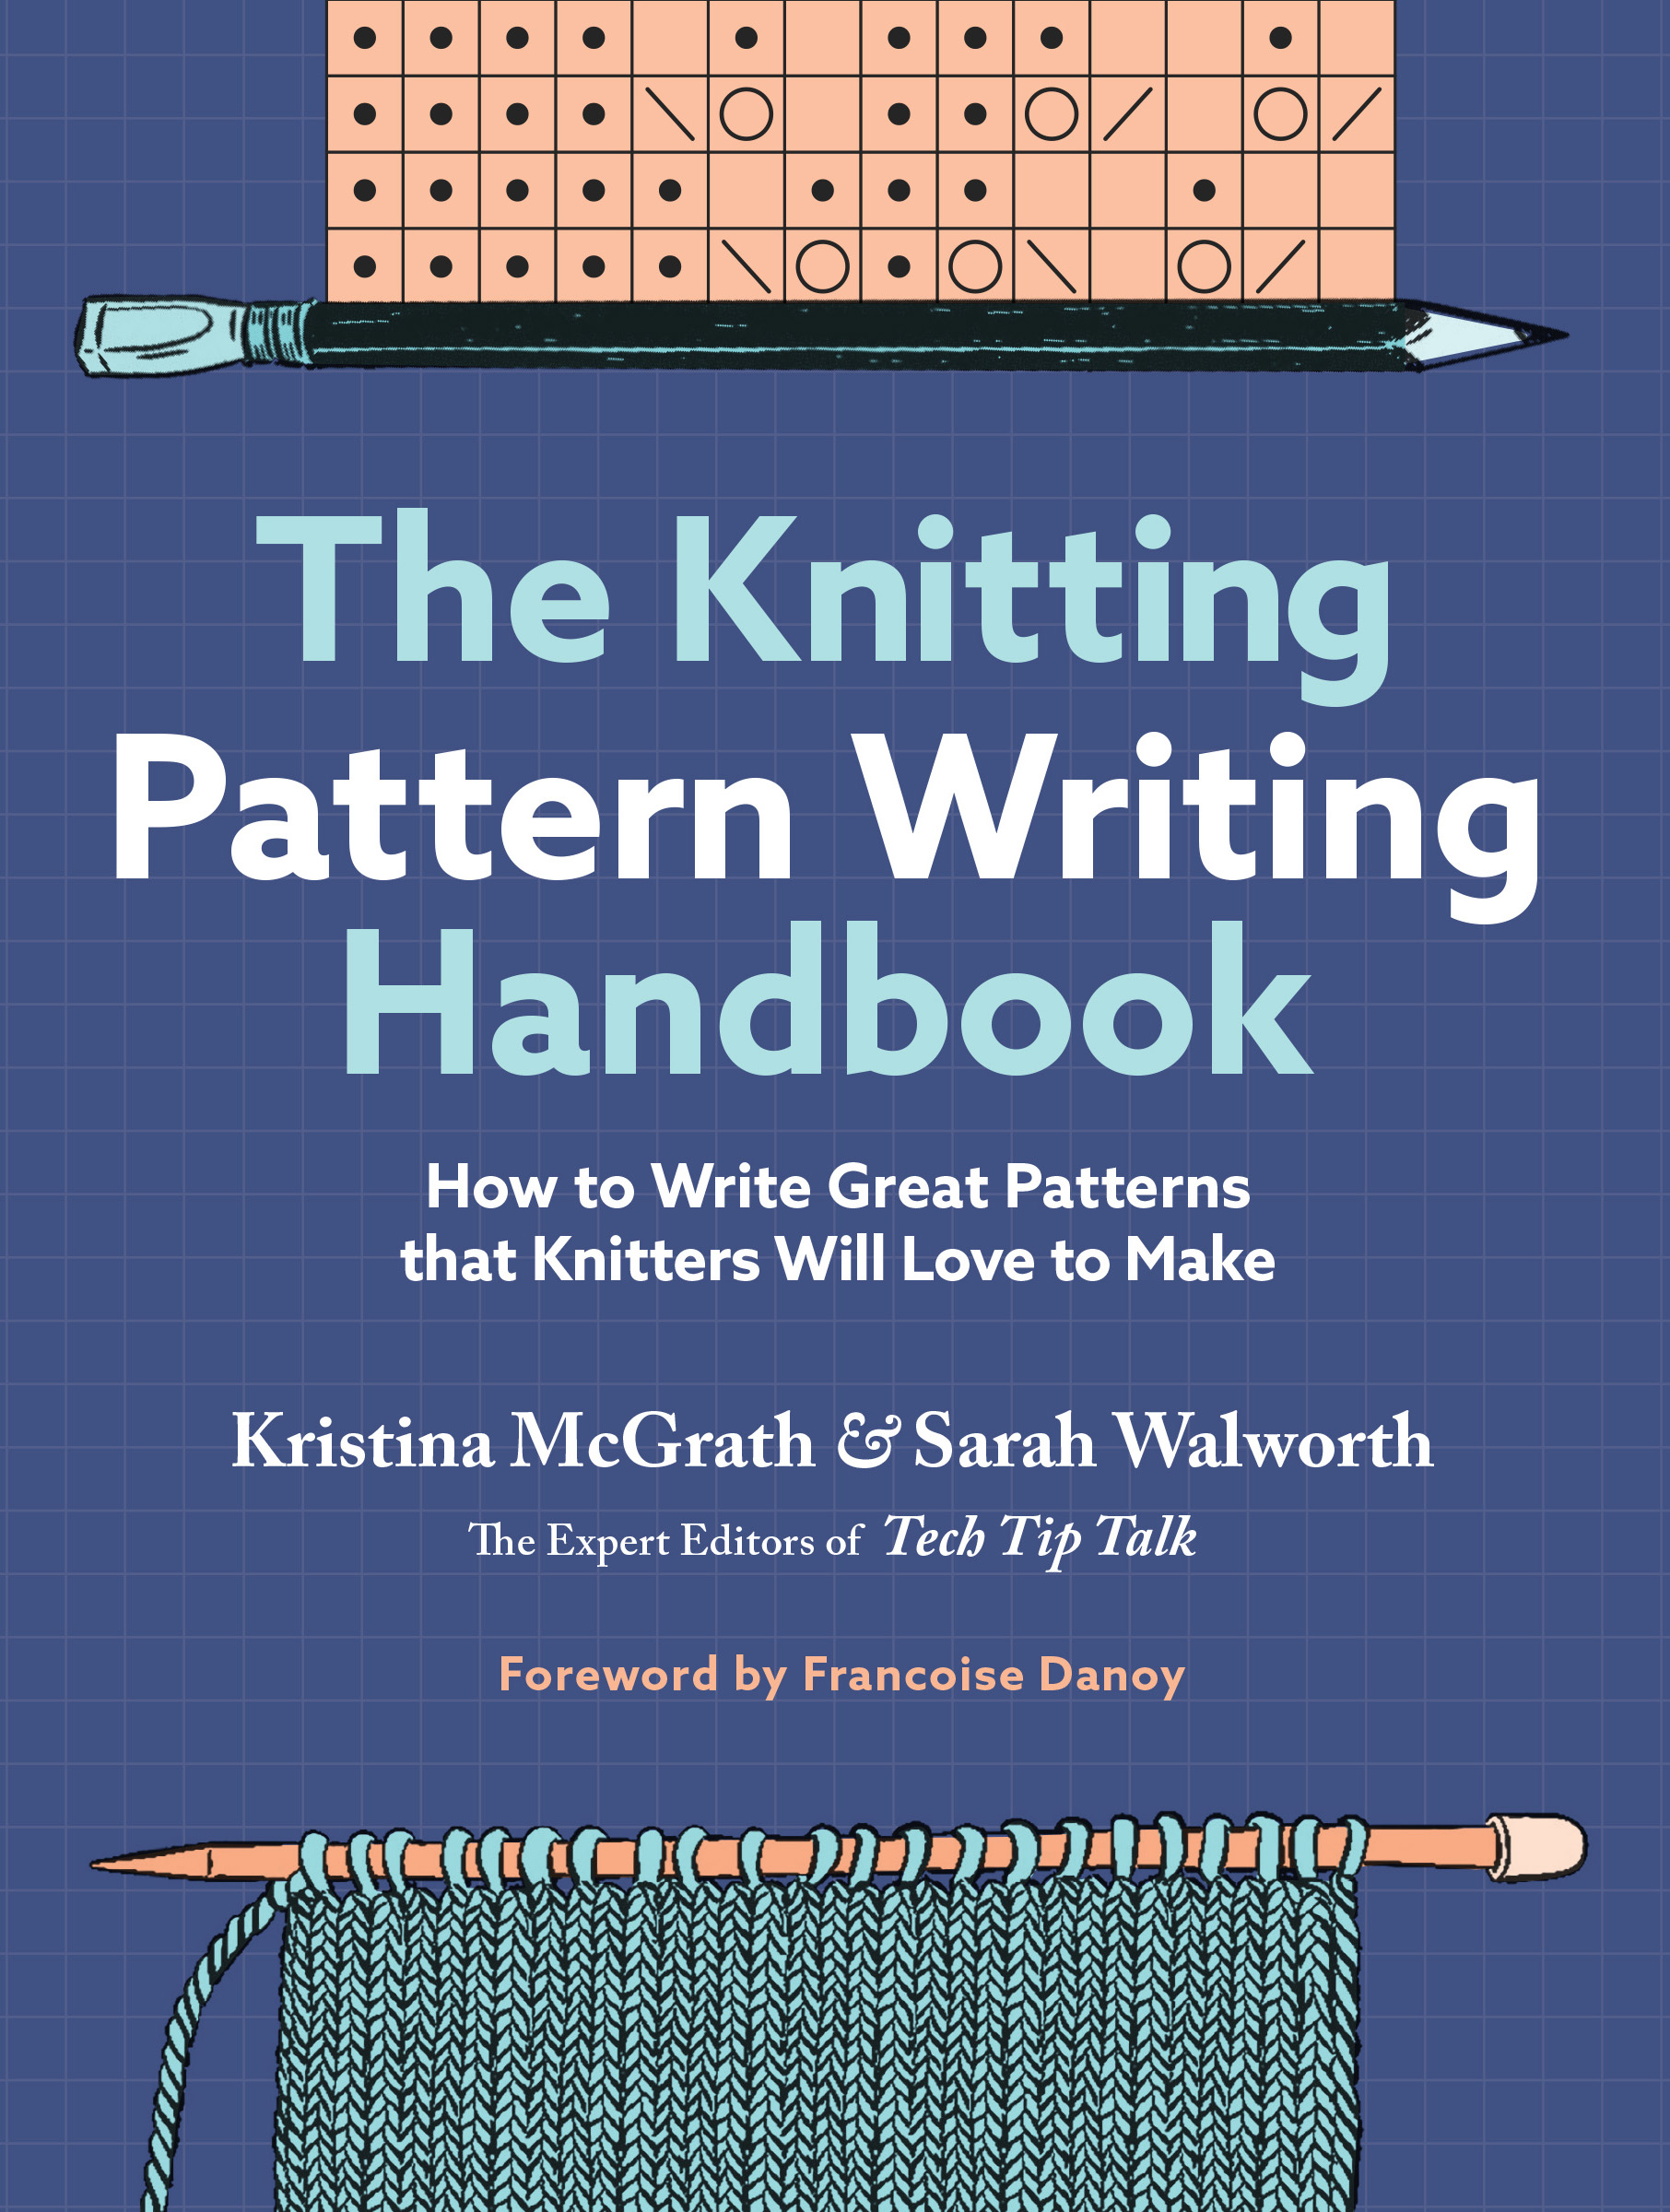 Your Craft Library Needs These New Crochet and Knit Books